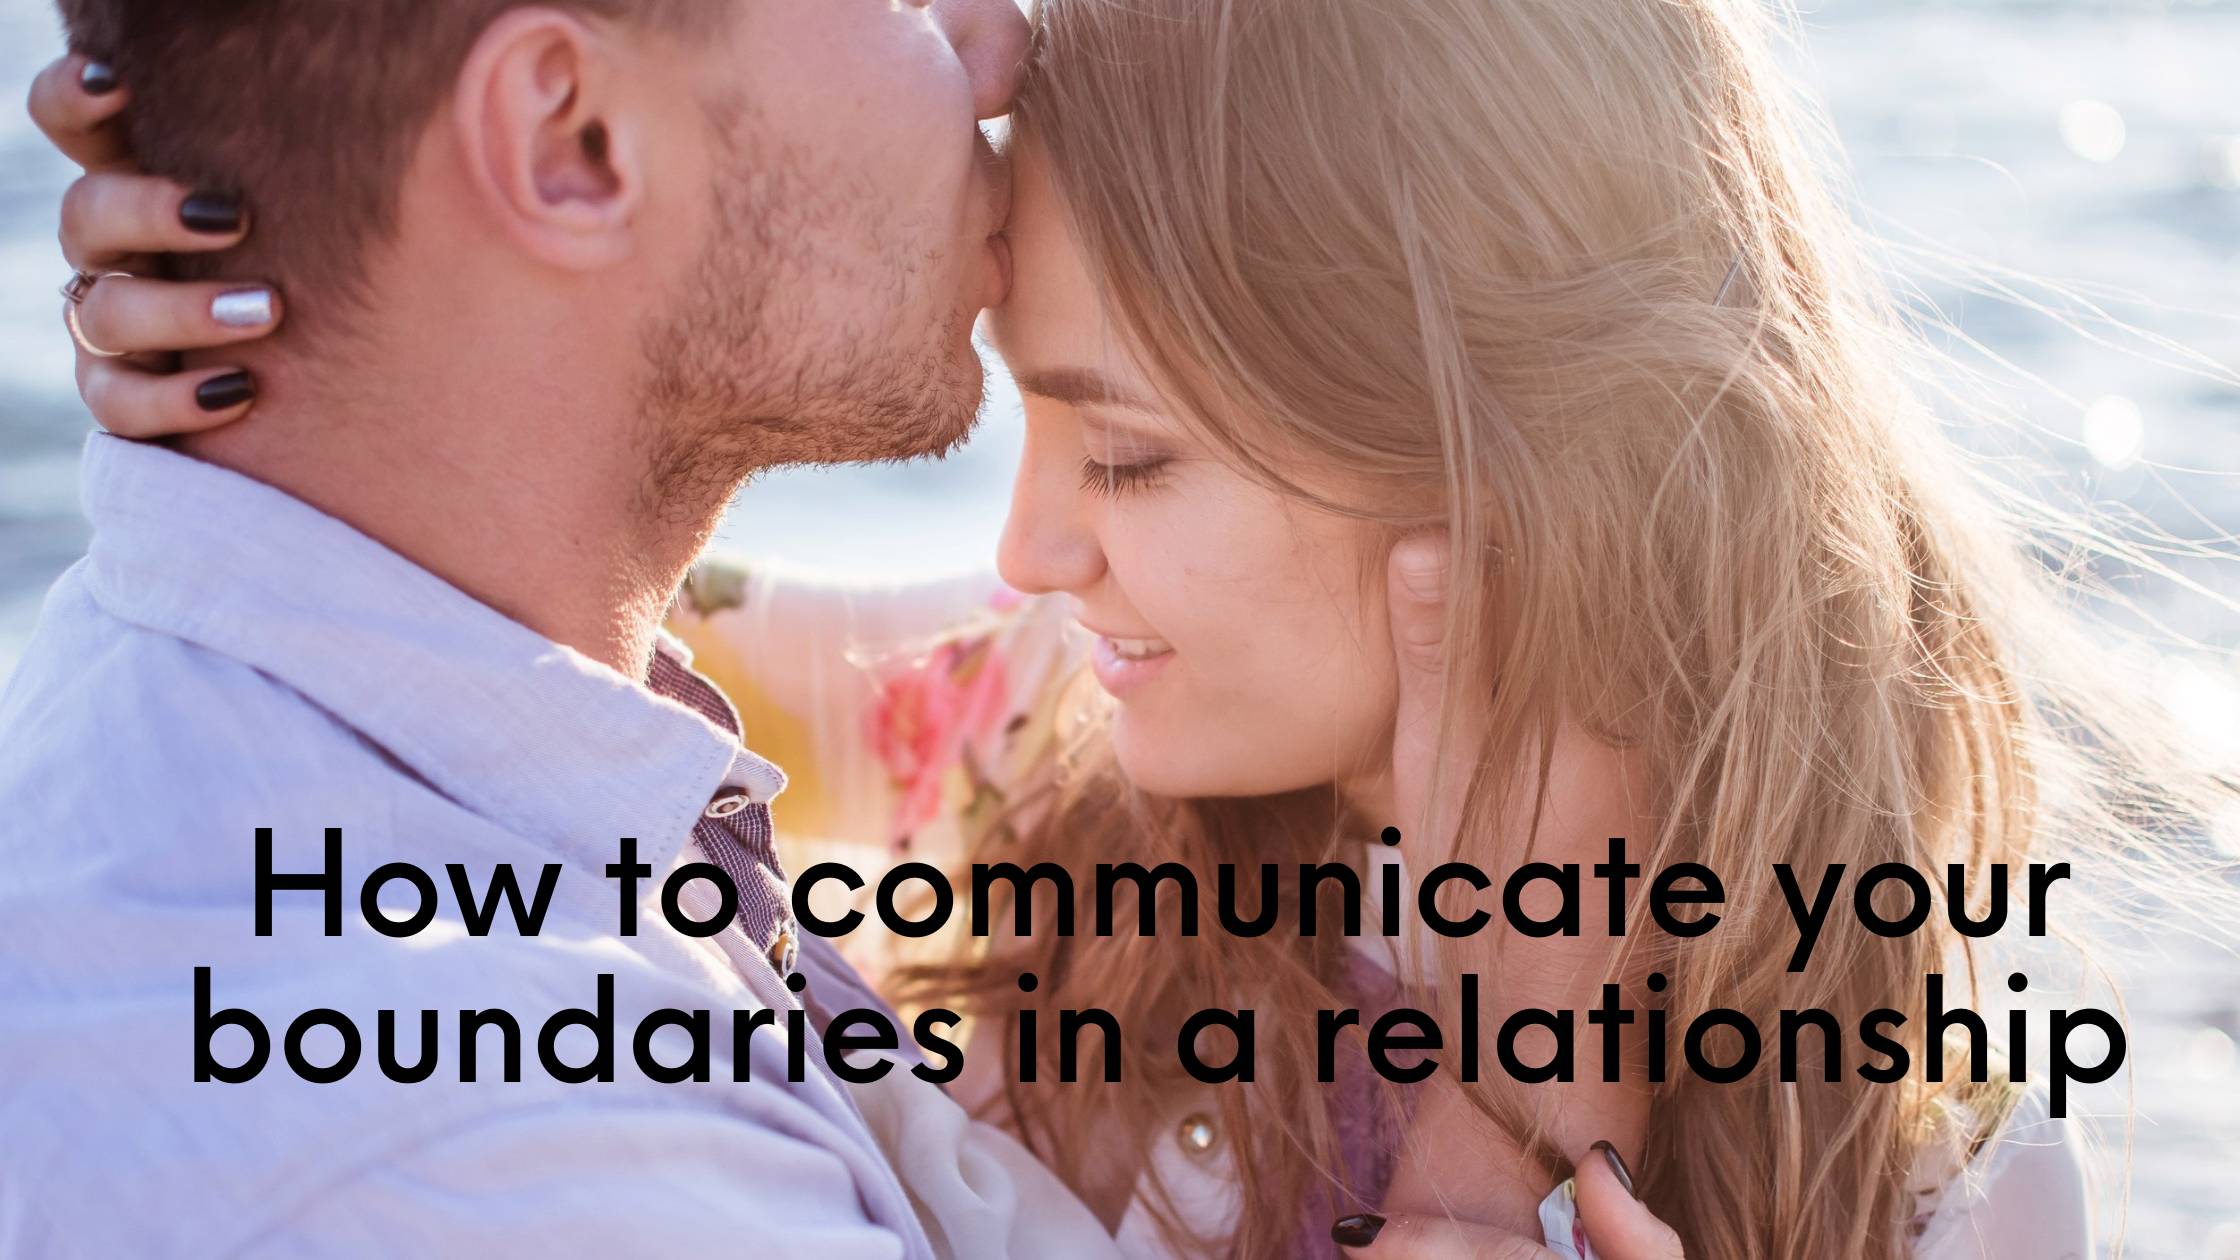 6 Smart Ways to Communicate Your Boundaries in a Relationship 31